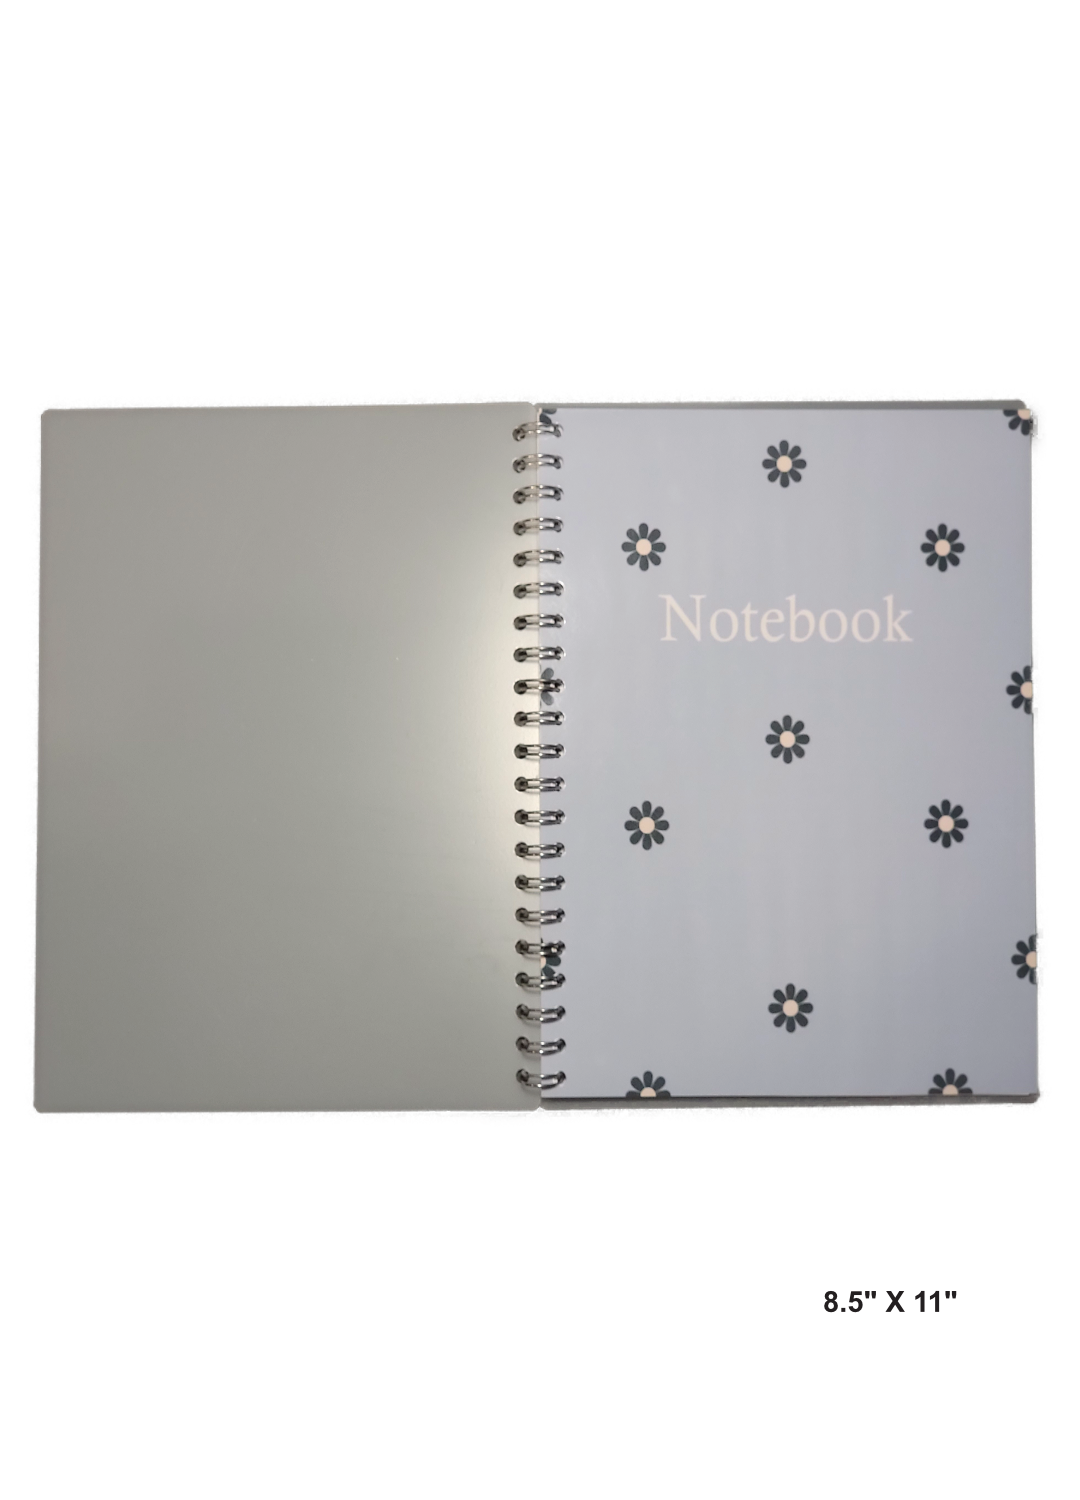 Image of hand-made 8.5" x 11" notebook with blue flowers with a light blue background cover. The notebook's pages are lined for writing or journaling.